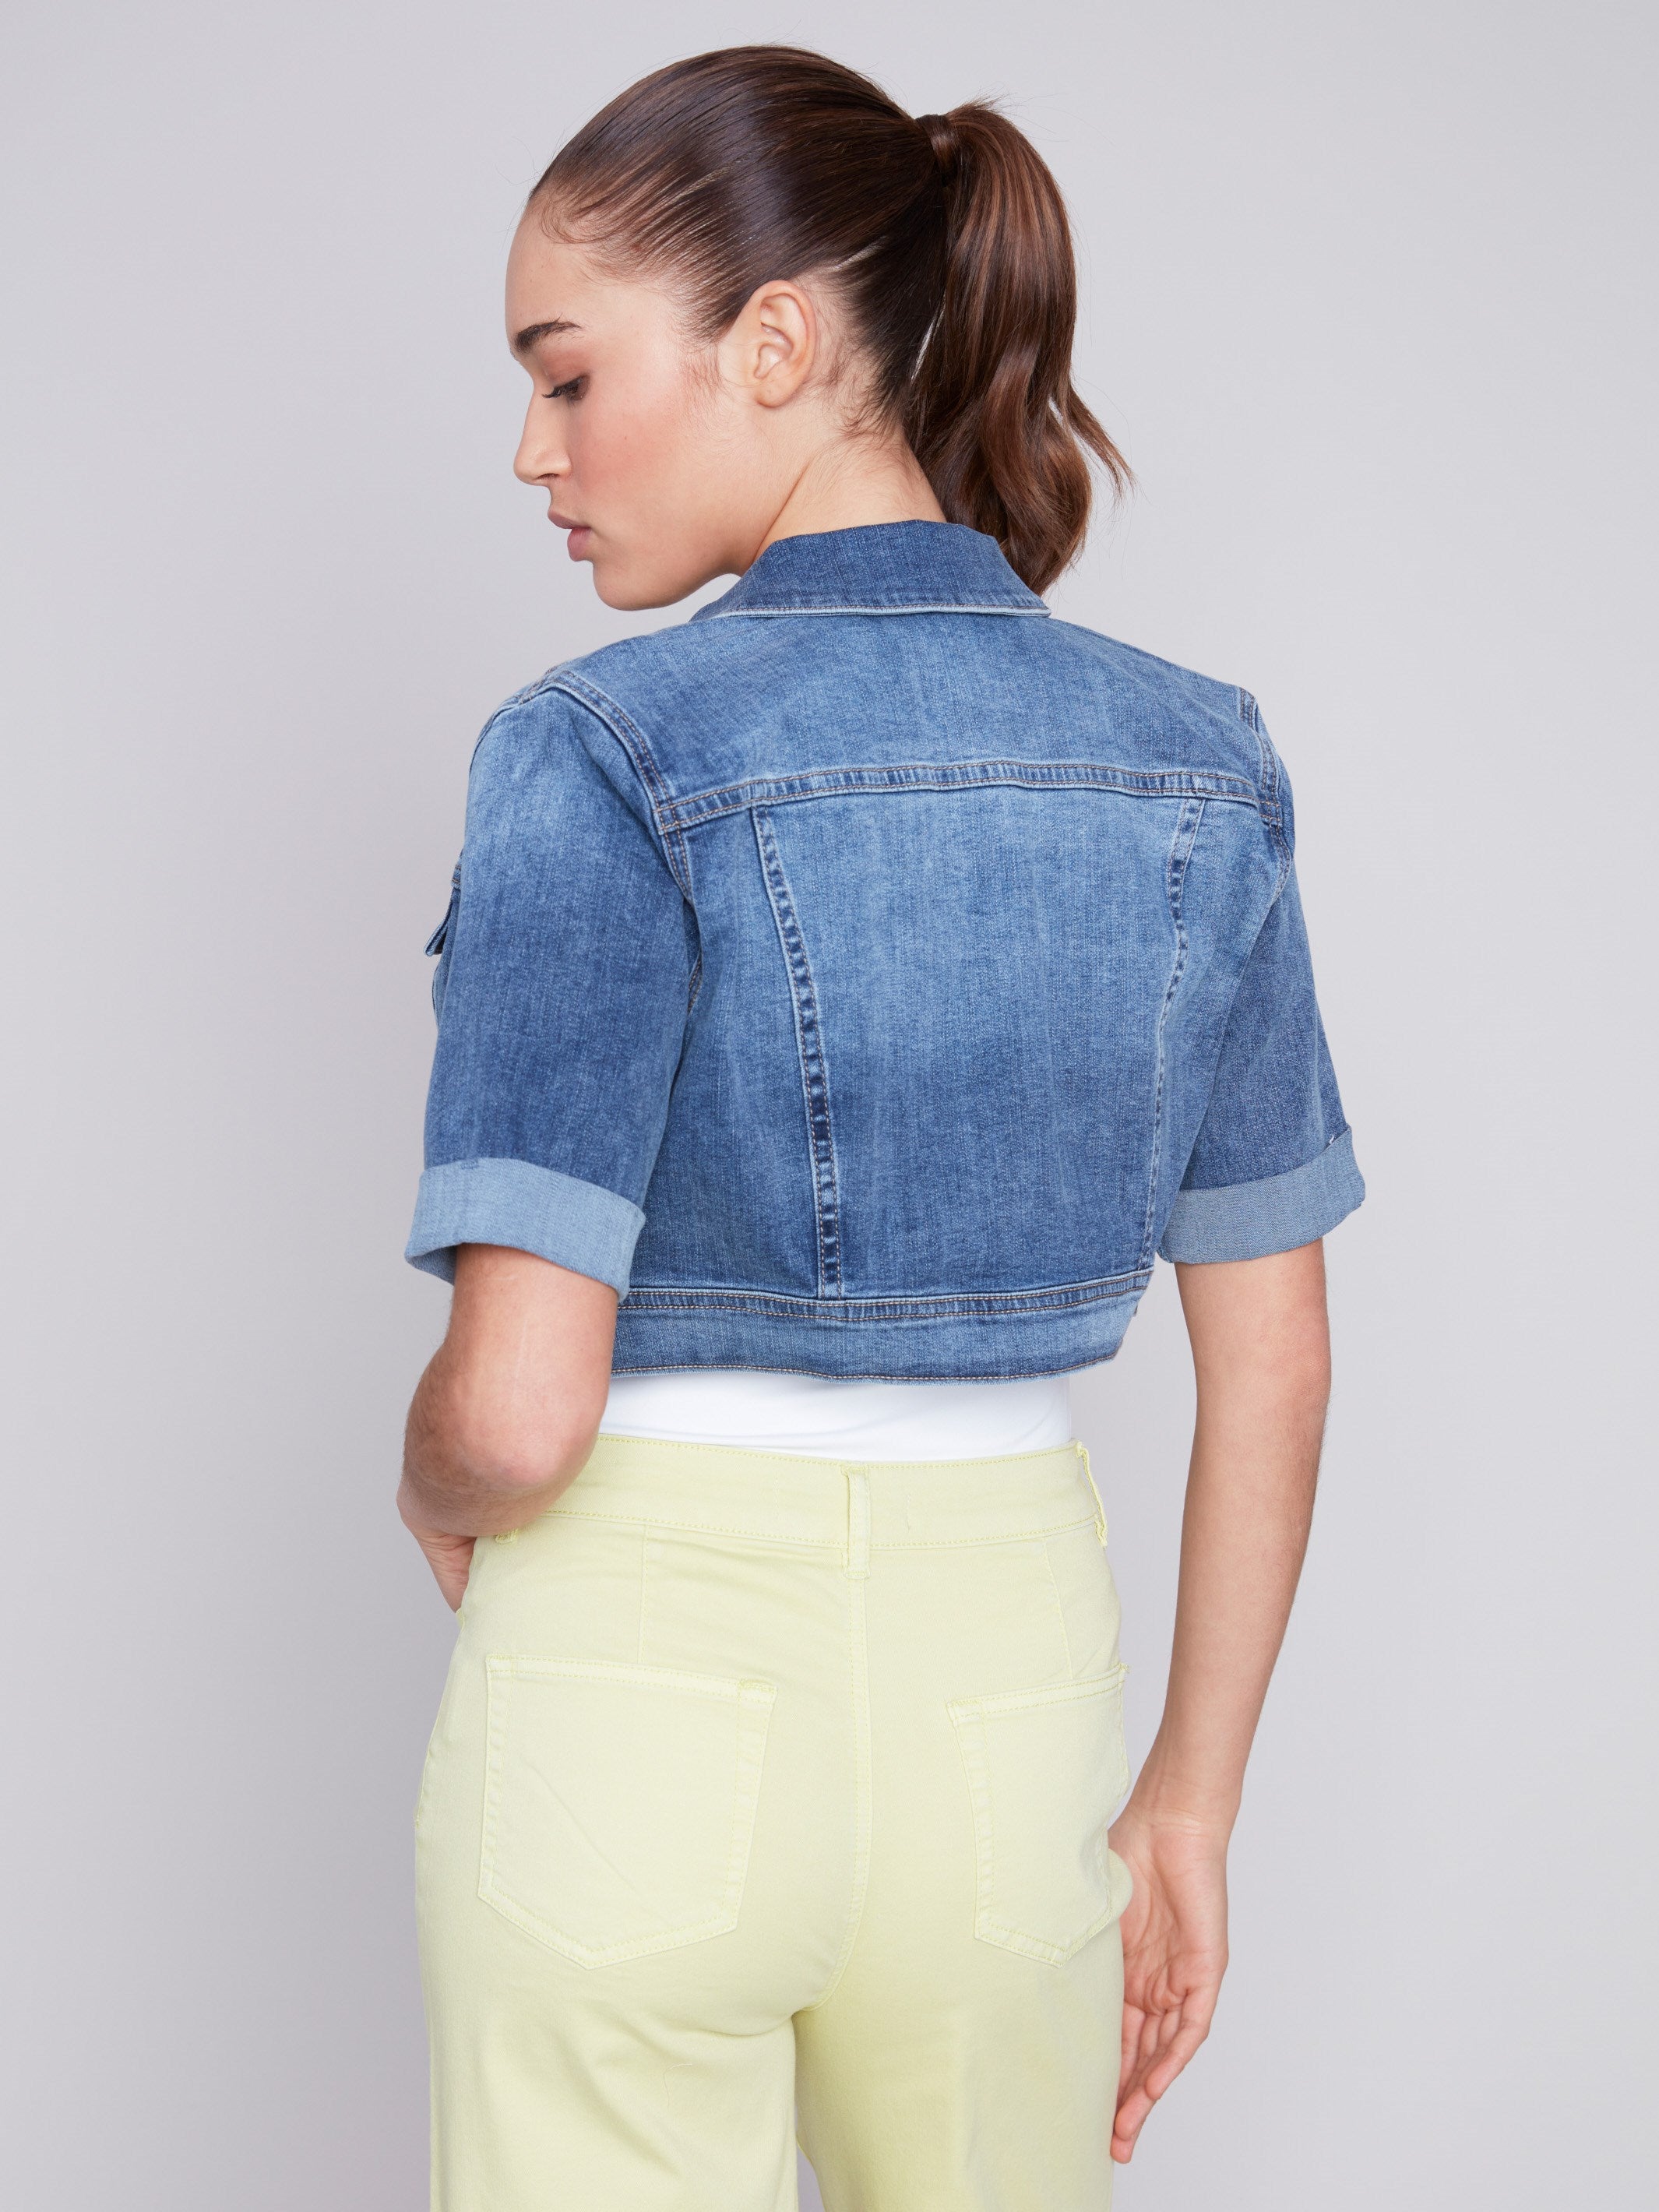 Cropped Jean Jacket - Medium Blue - Charlie B Collection Canada - Image 2